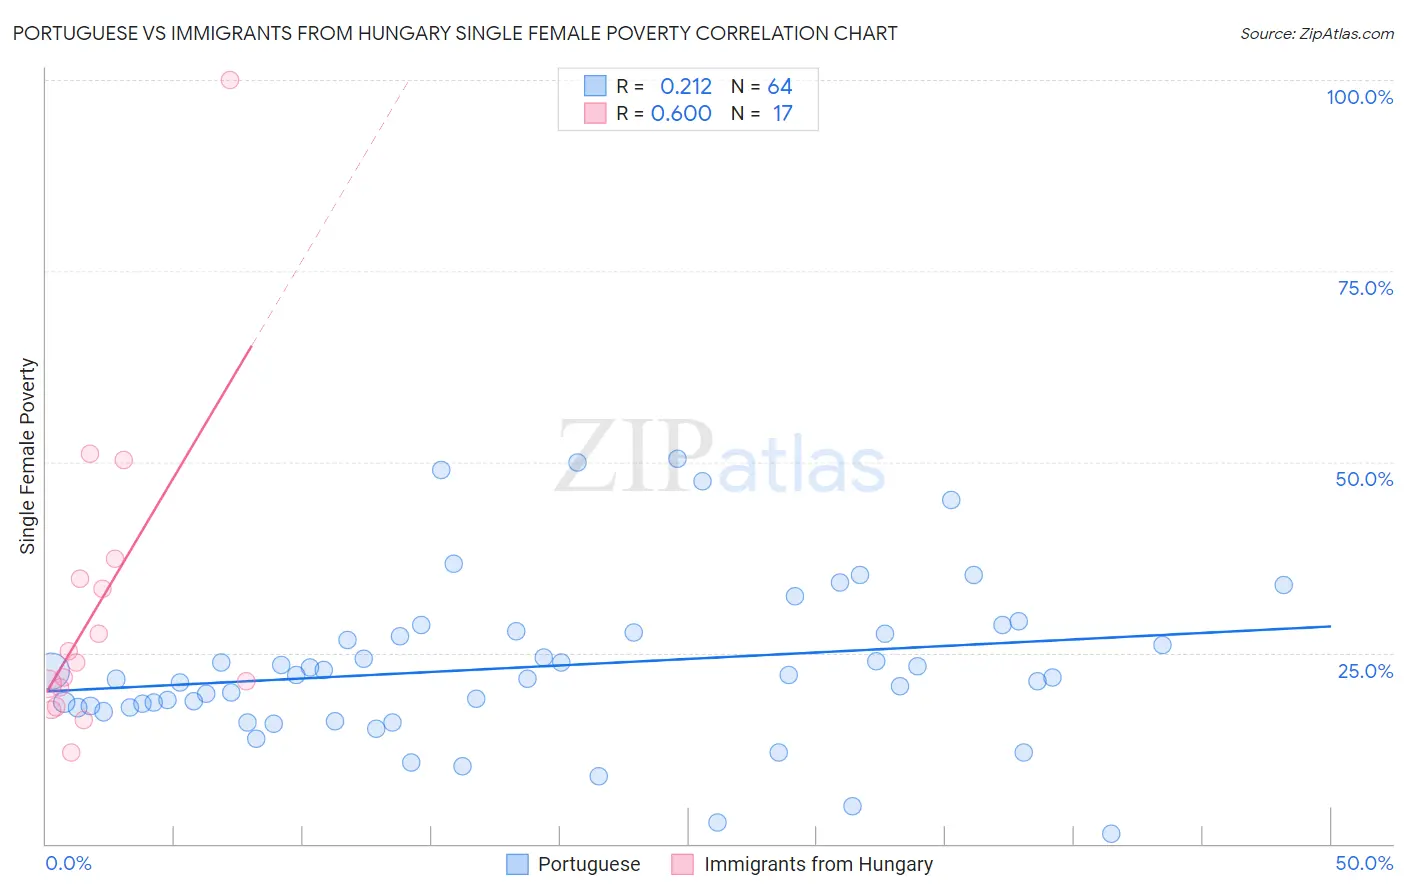 Portuguese vs Immigrants from Hungary Single Female Poverty